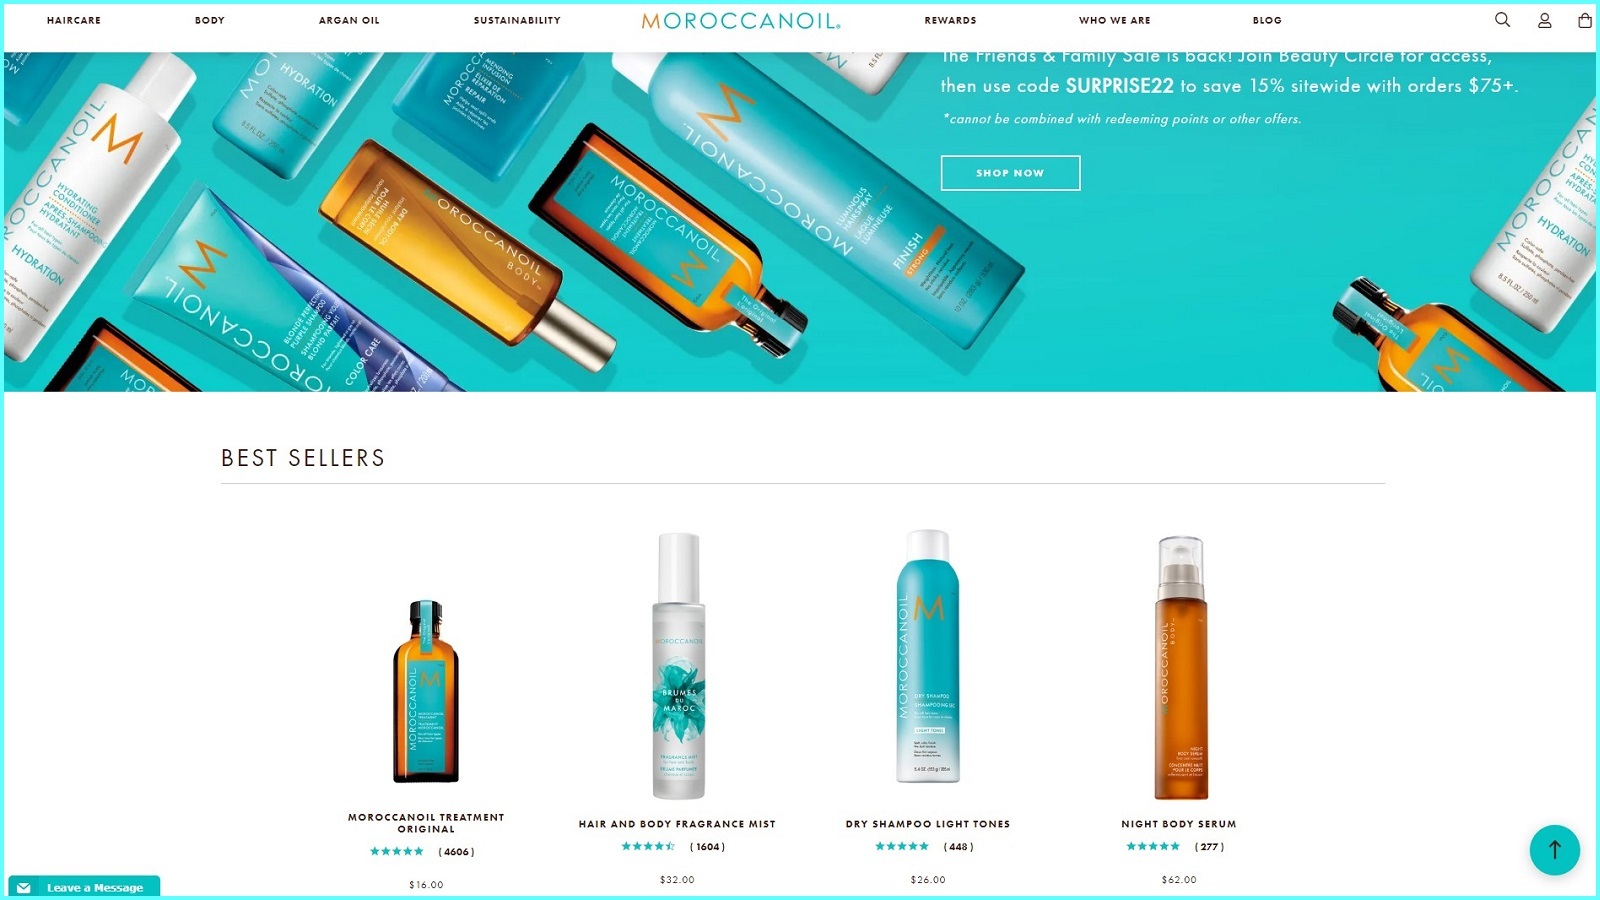 Moroccan Oil Hair Treatment - wide 7